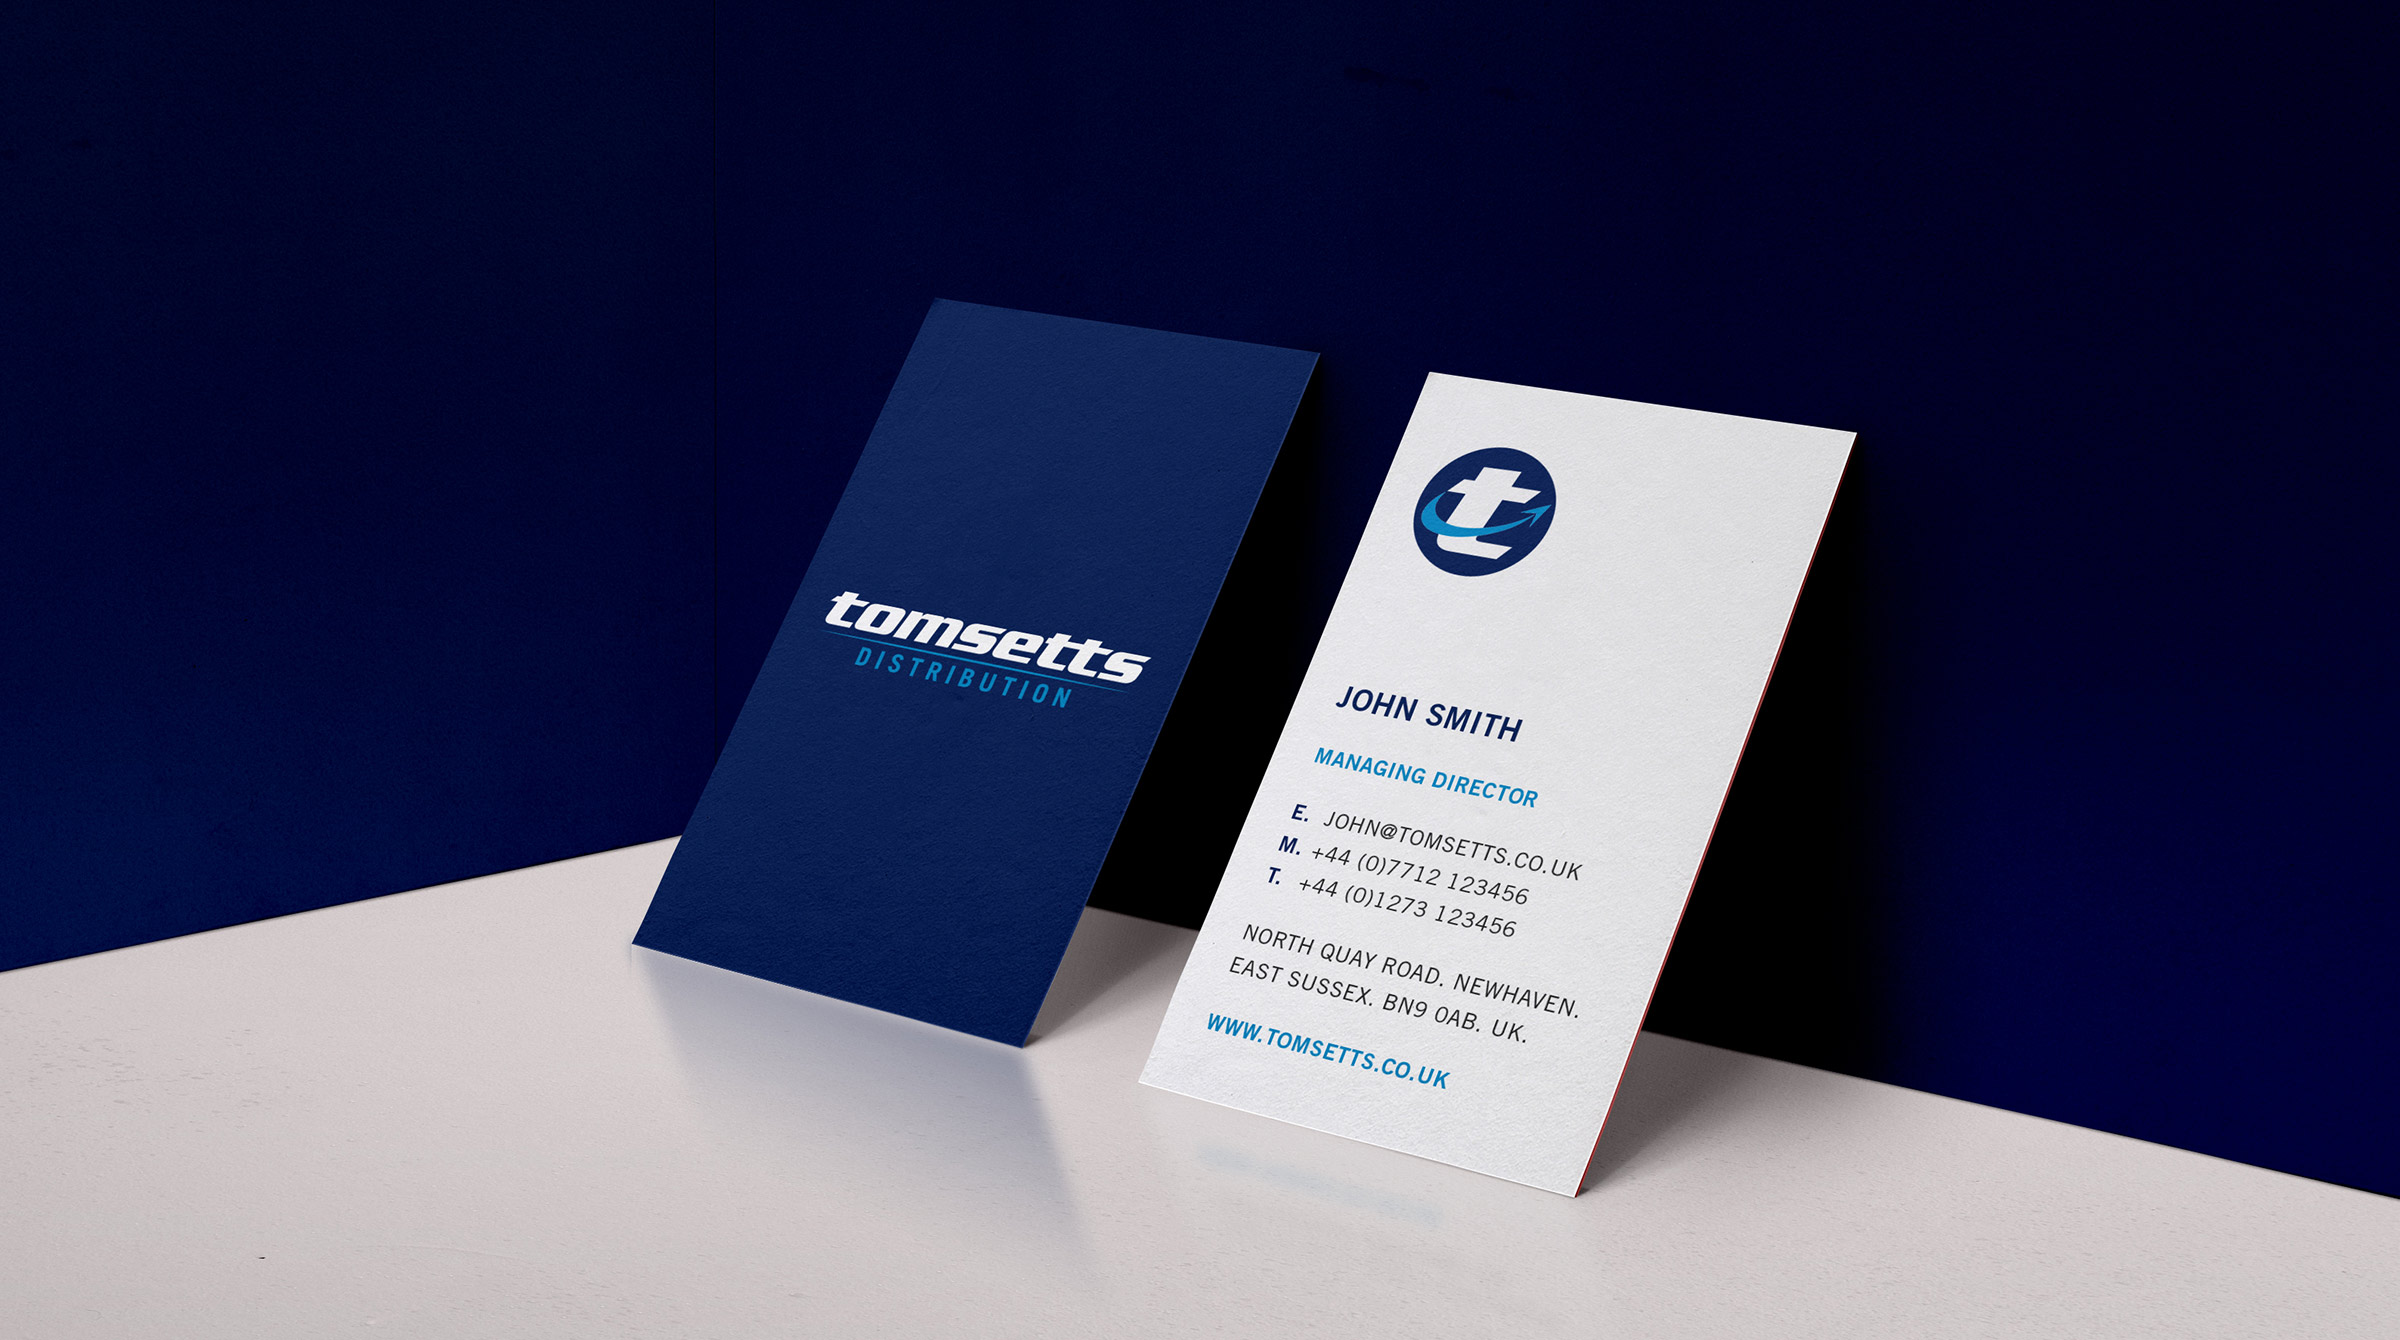 Business card designs, front and back.